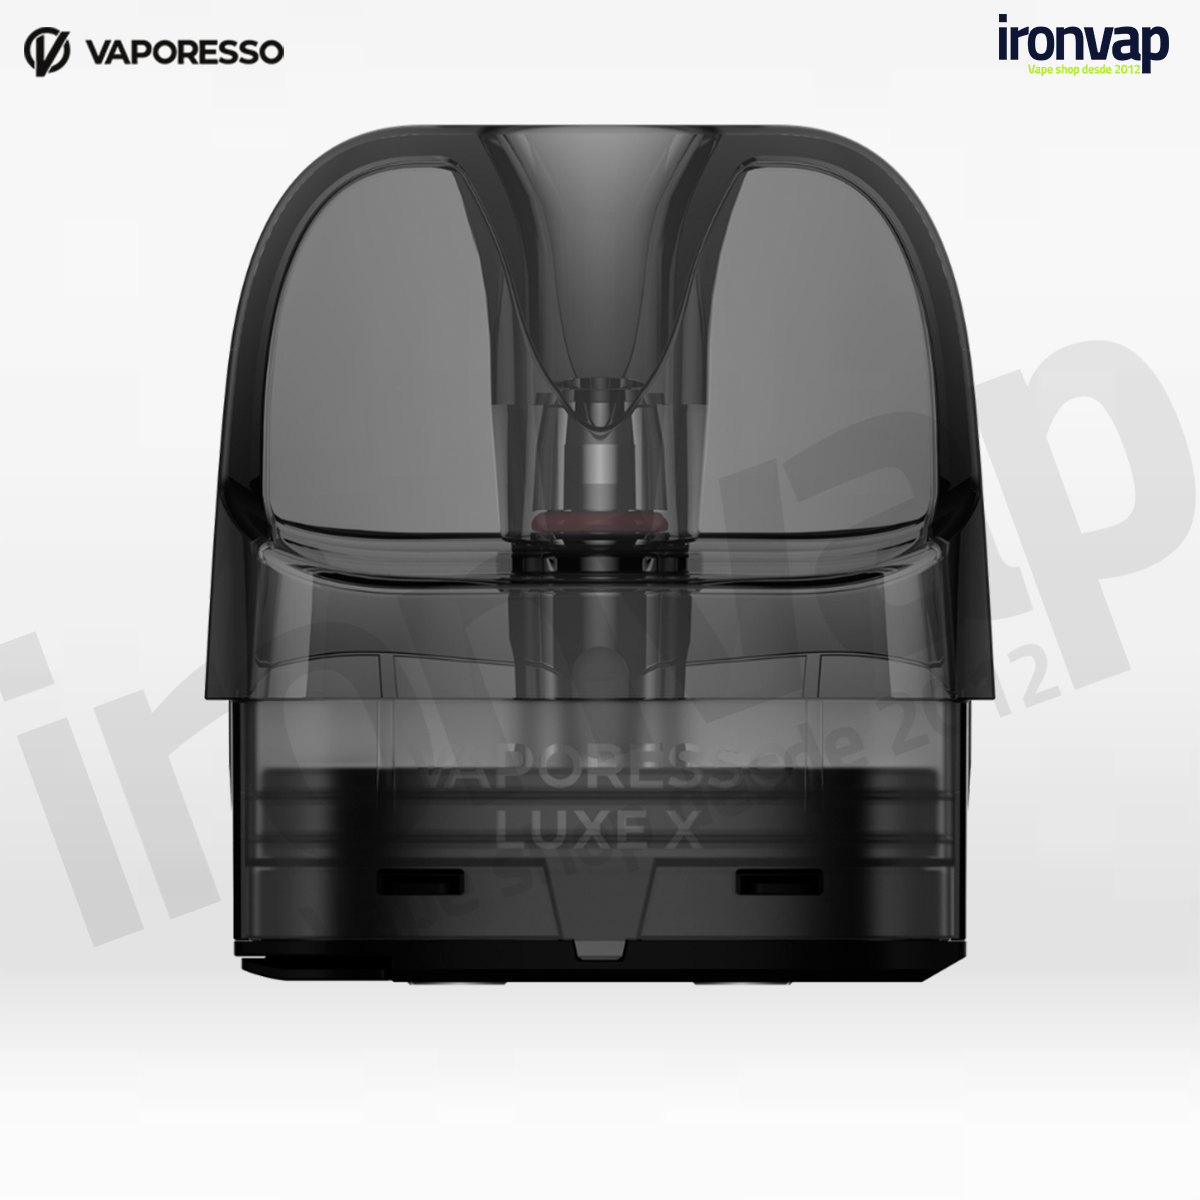 Pod%20Luxe%20X%2006ohms%20-%20VAPORESSO.png